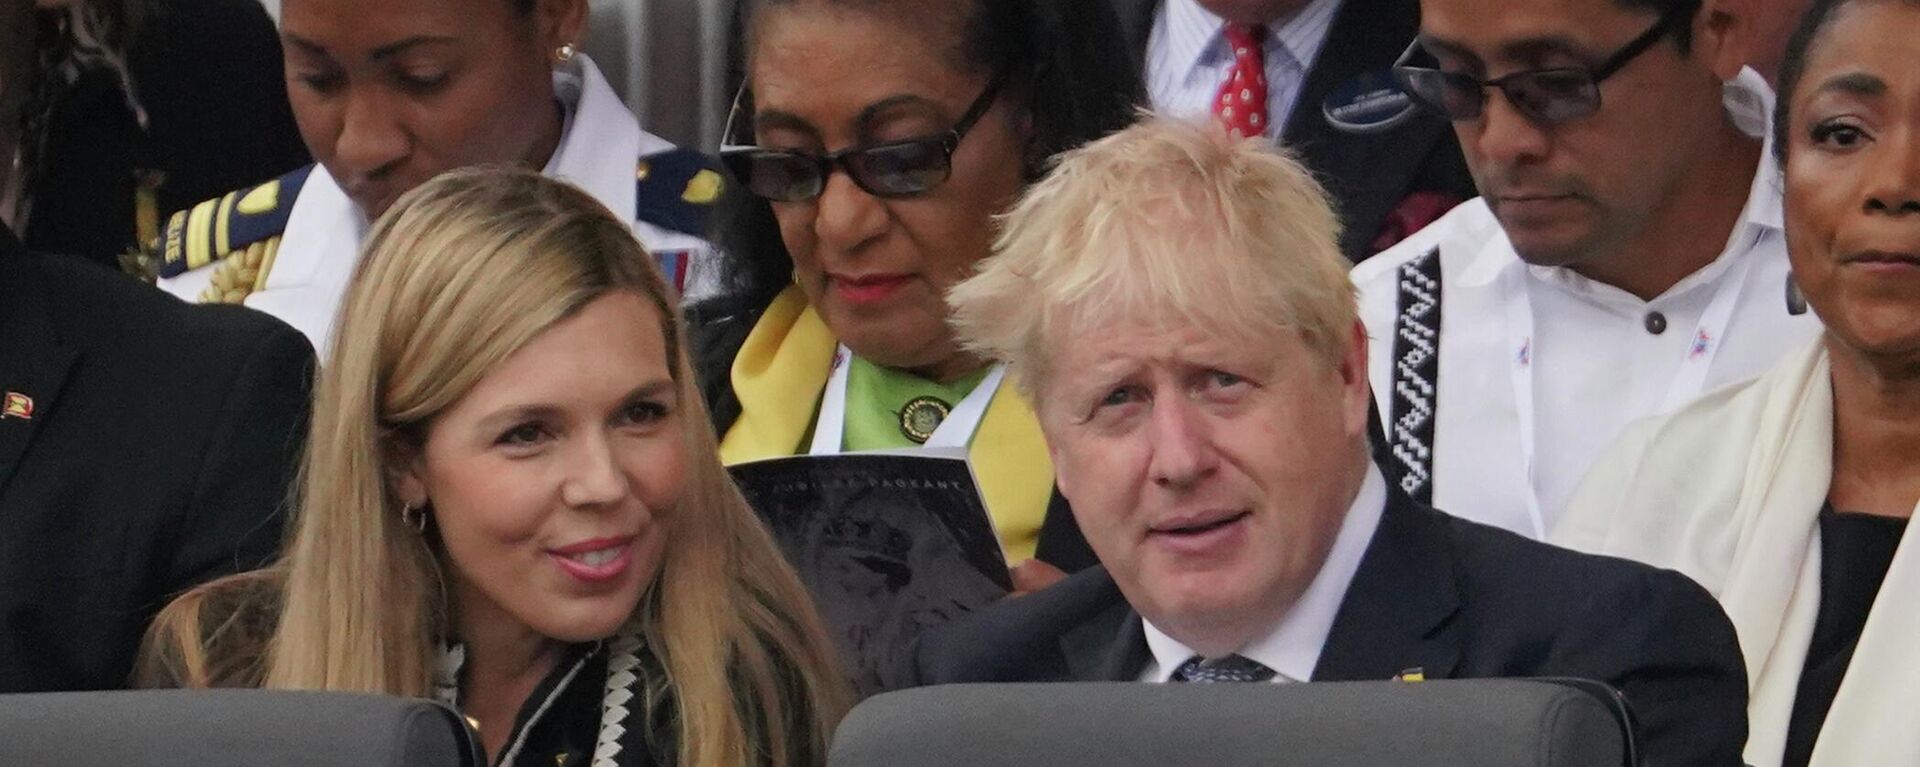 Britain's Prime Minister Boris Johnson and his wife Carrie Johnson during the Platinum Jubilee Pageant outside Buckingham Palace - Sputnik International, 1920, 06.06.2022